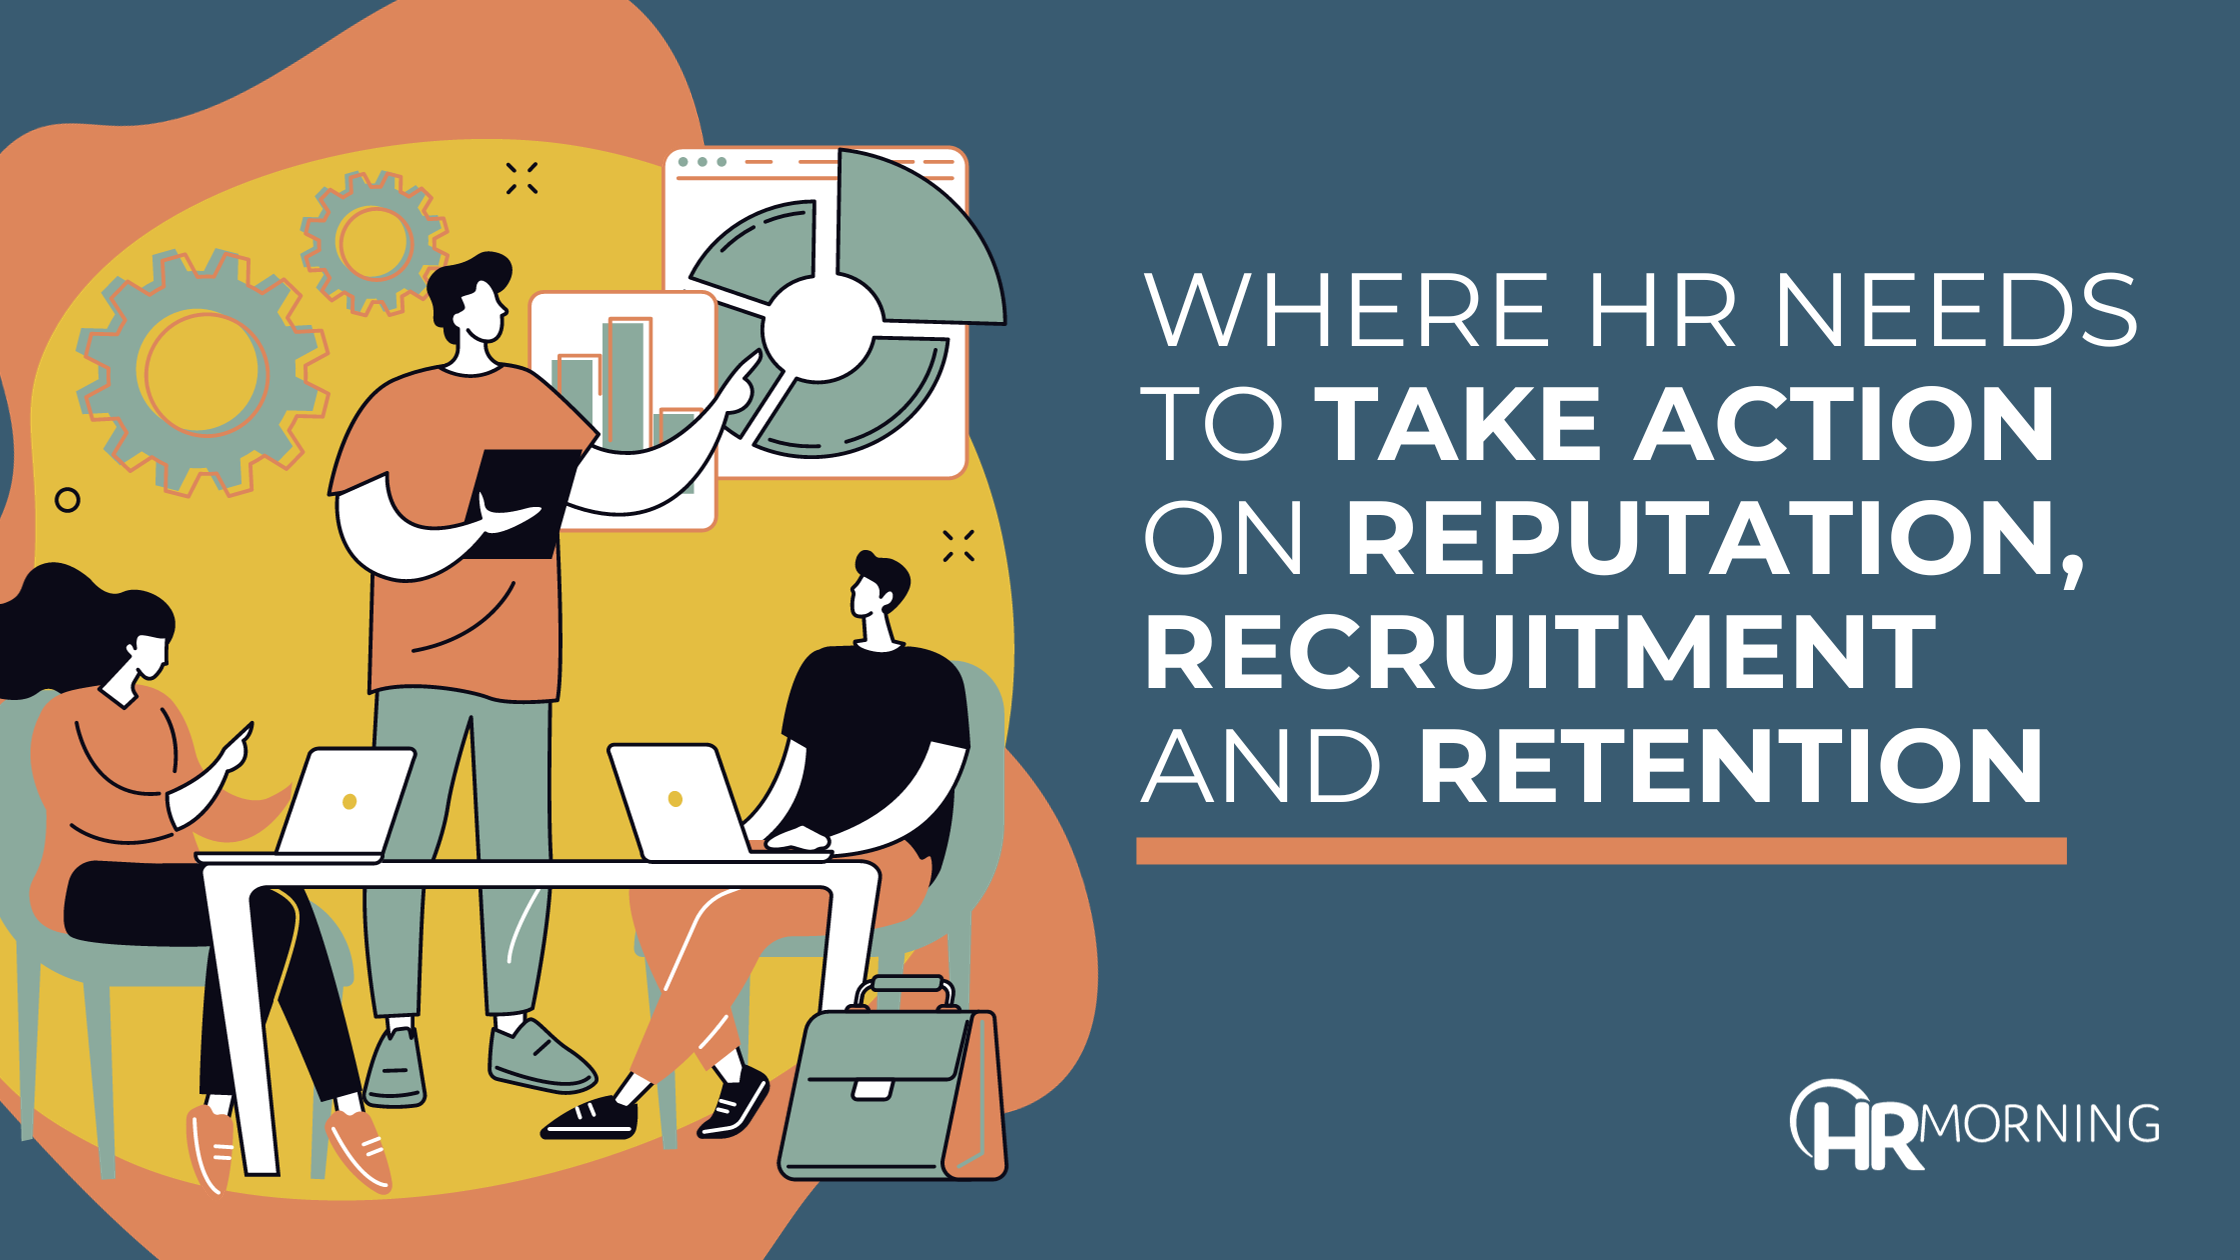 Where HR needs to take action on reputation, recruitment and retention